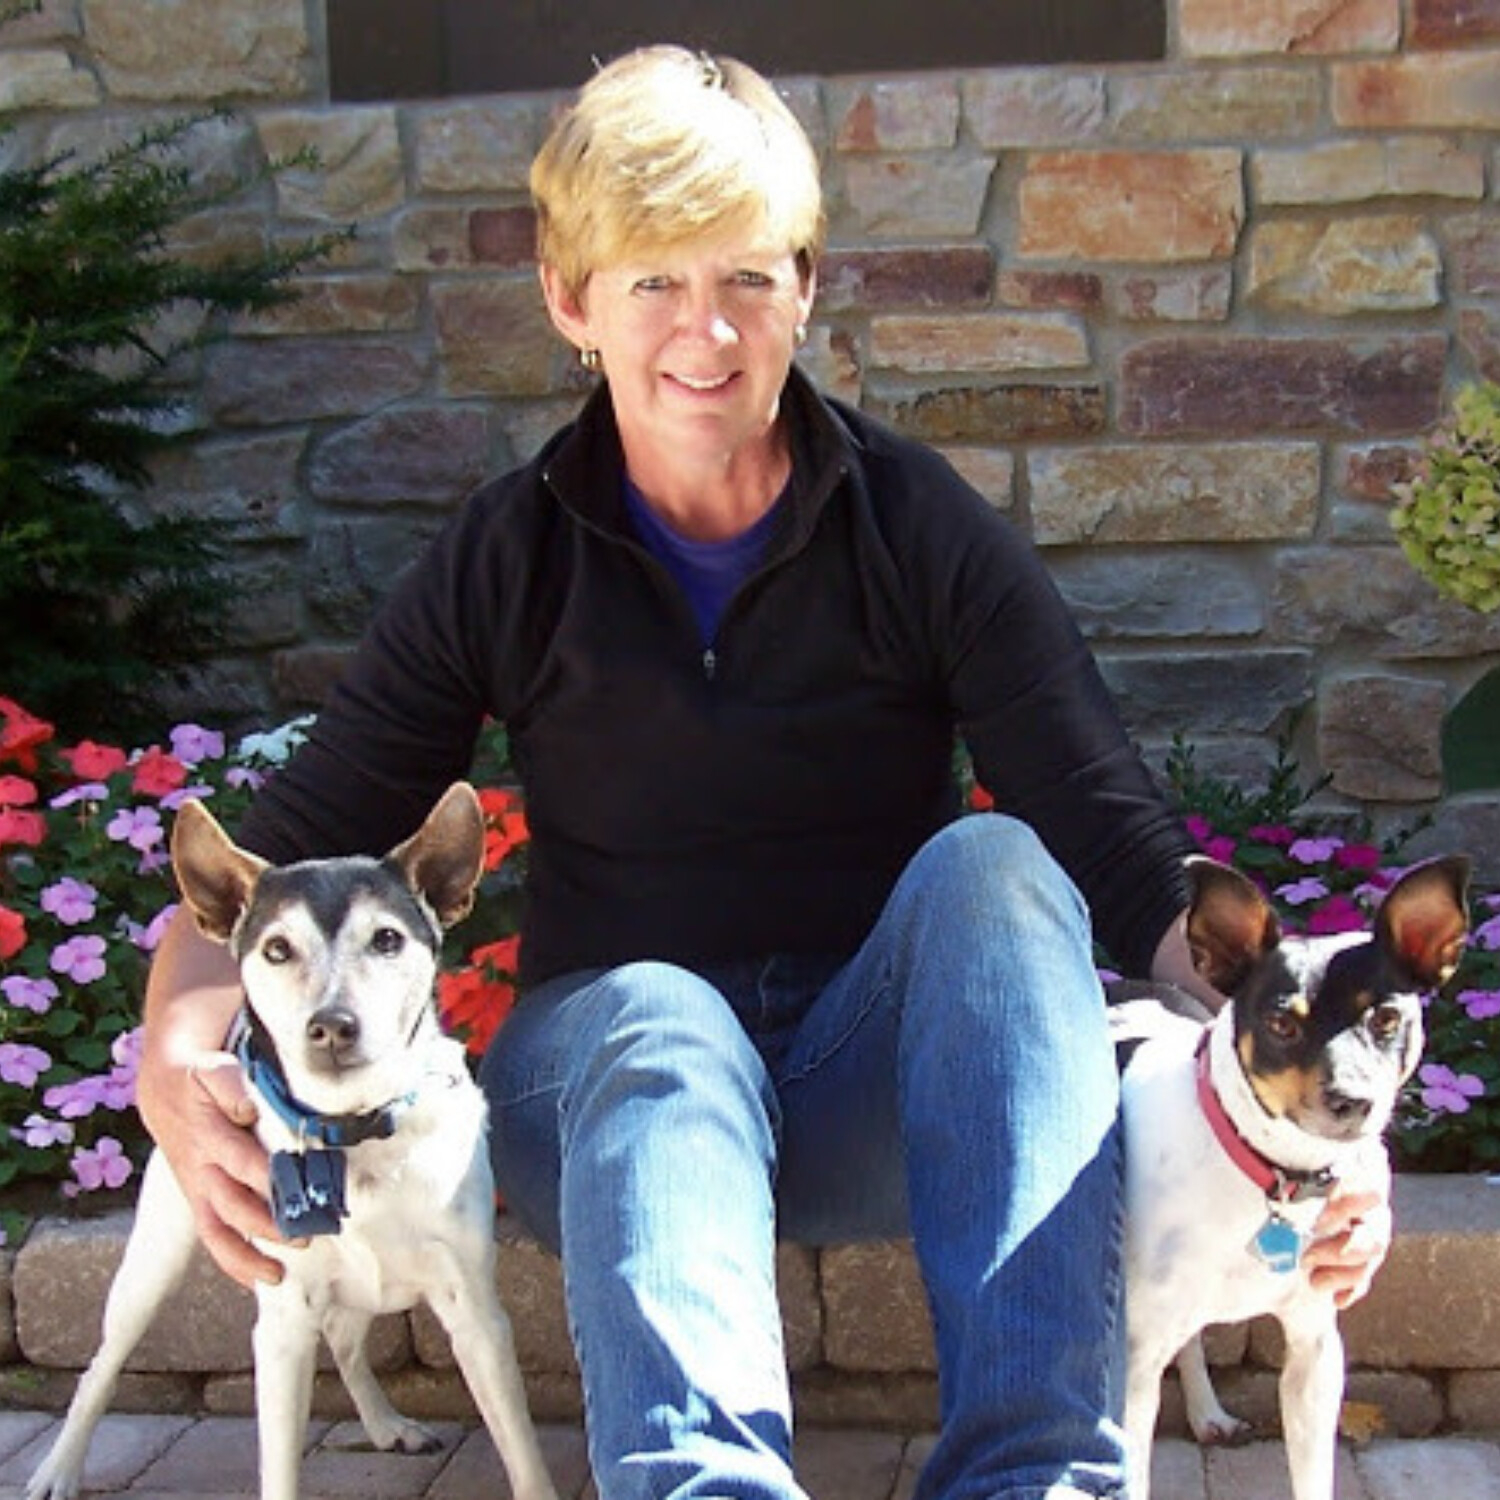 INTERFERING IN LOST DOG RECOVERY - KATHY POBLOSKIE